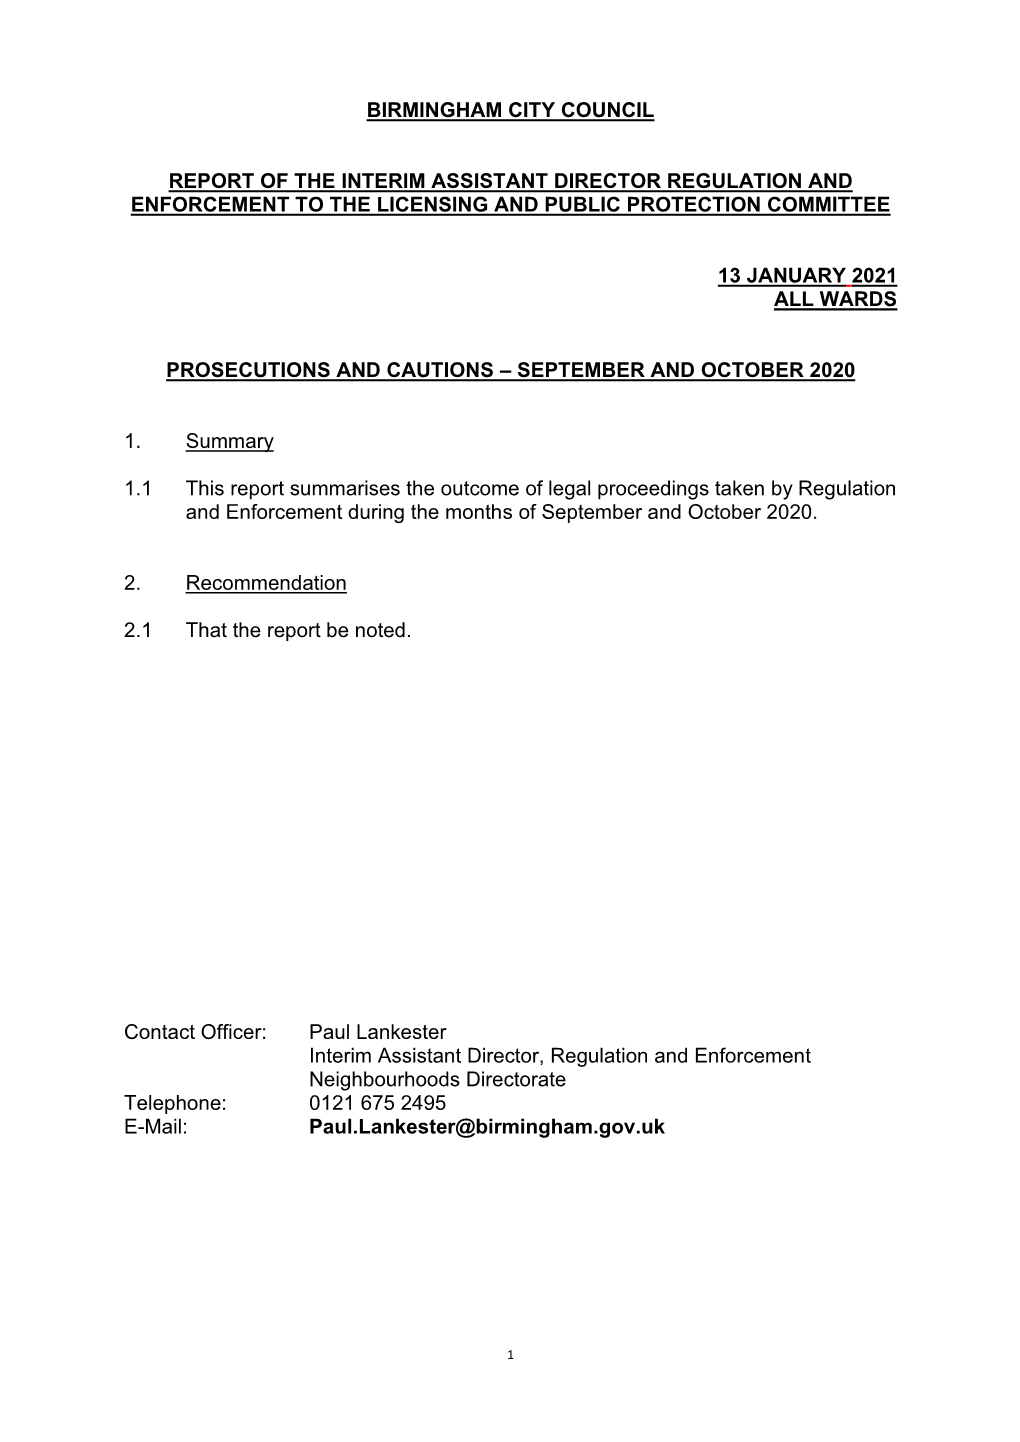 Birmingham City Council Report of the Interim Assistant Director Regulation and Enforcement to the Licensing and Public Protecti